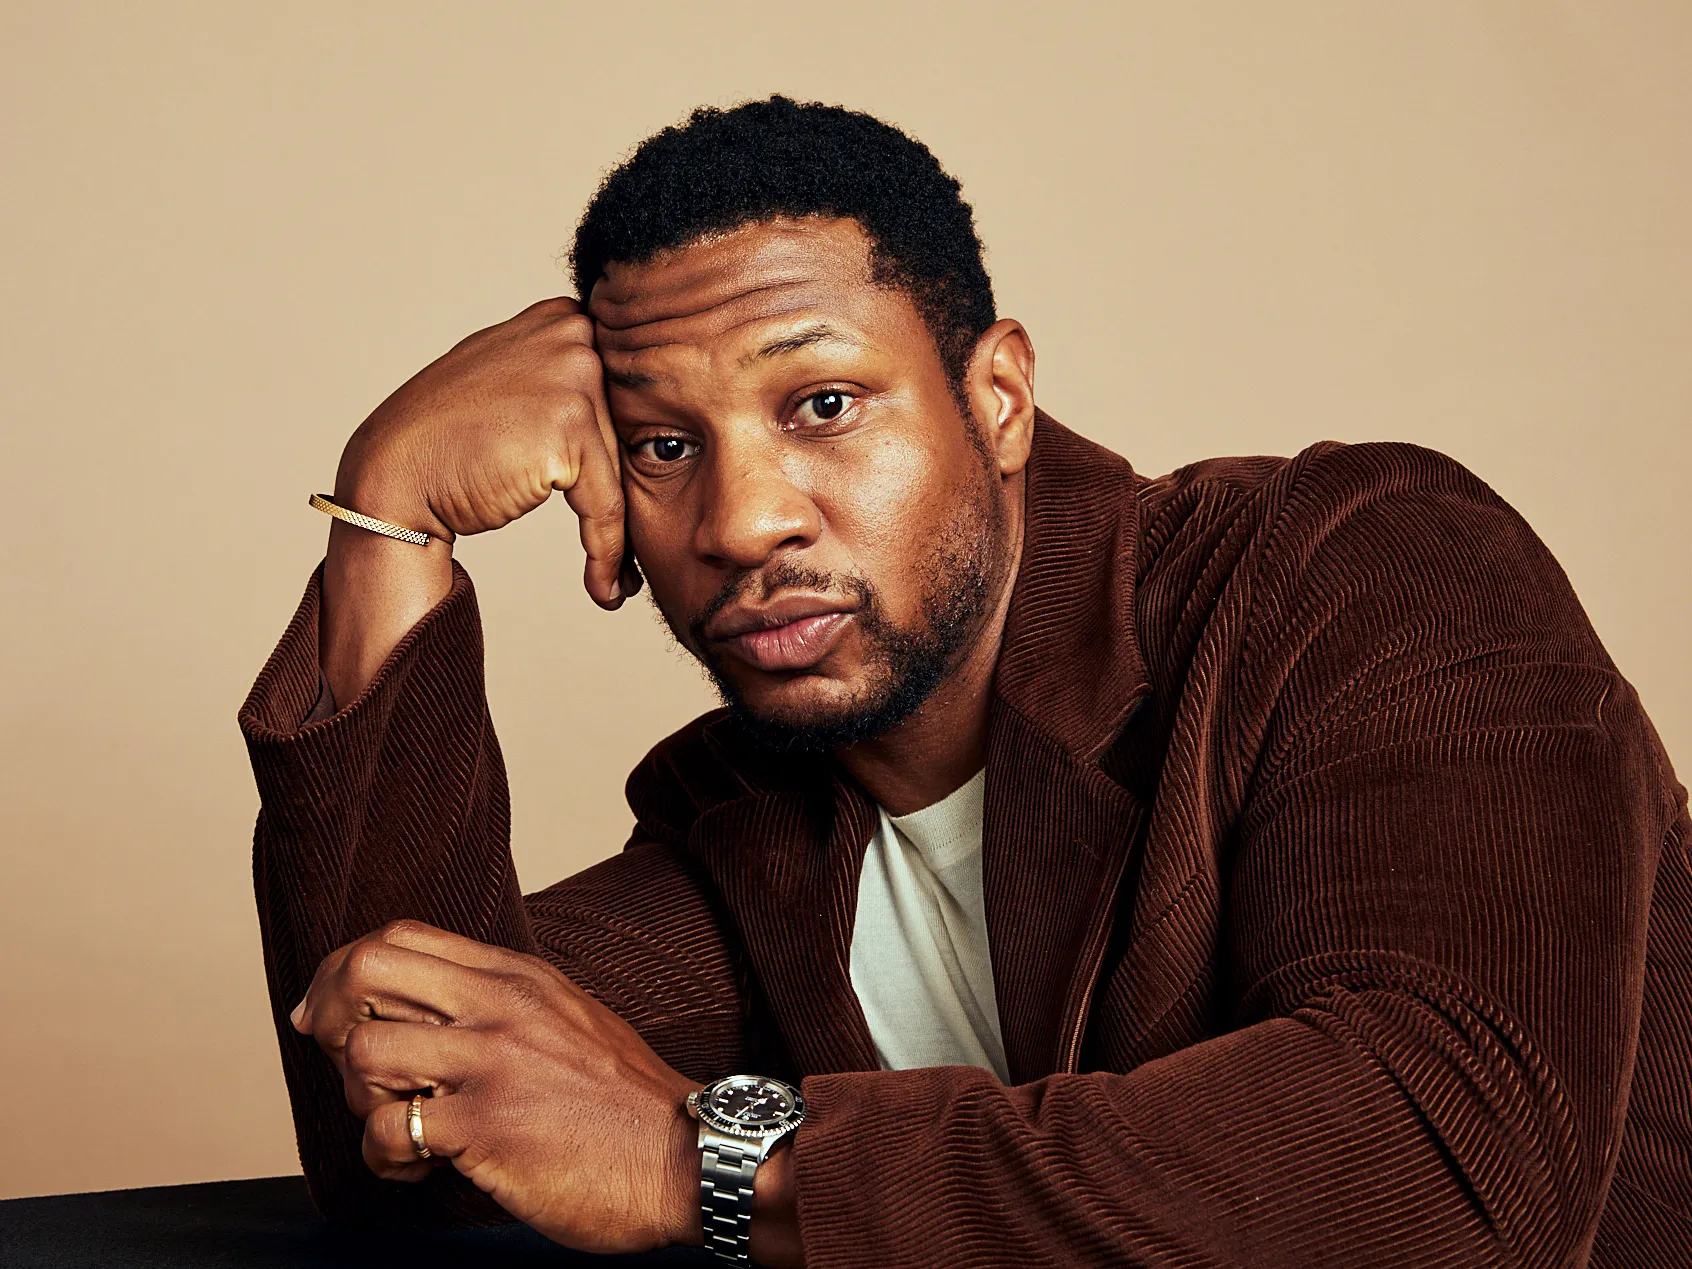 Jonathan Majors has kept his dating history relatively private